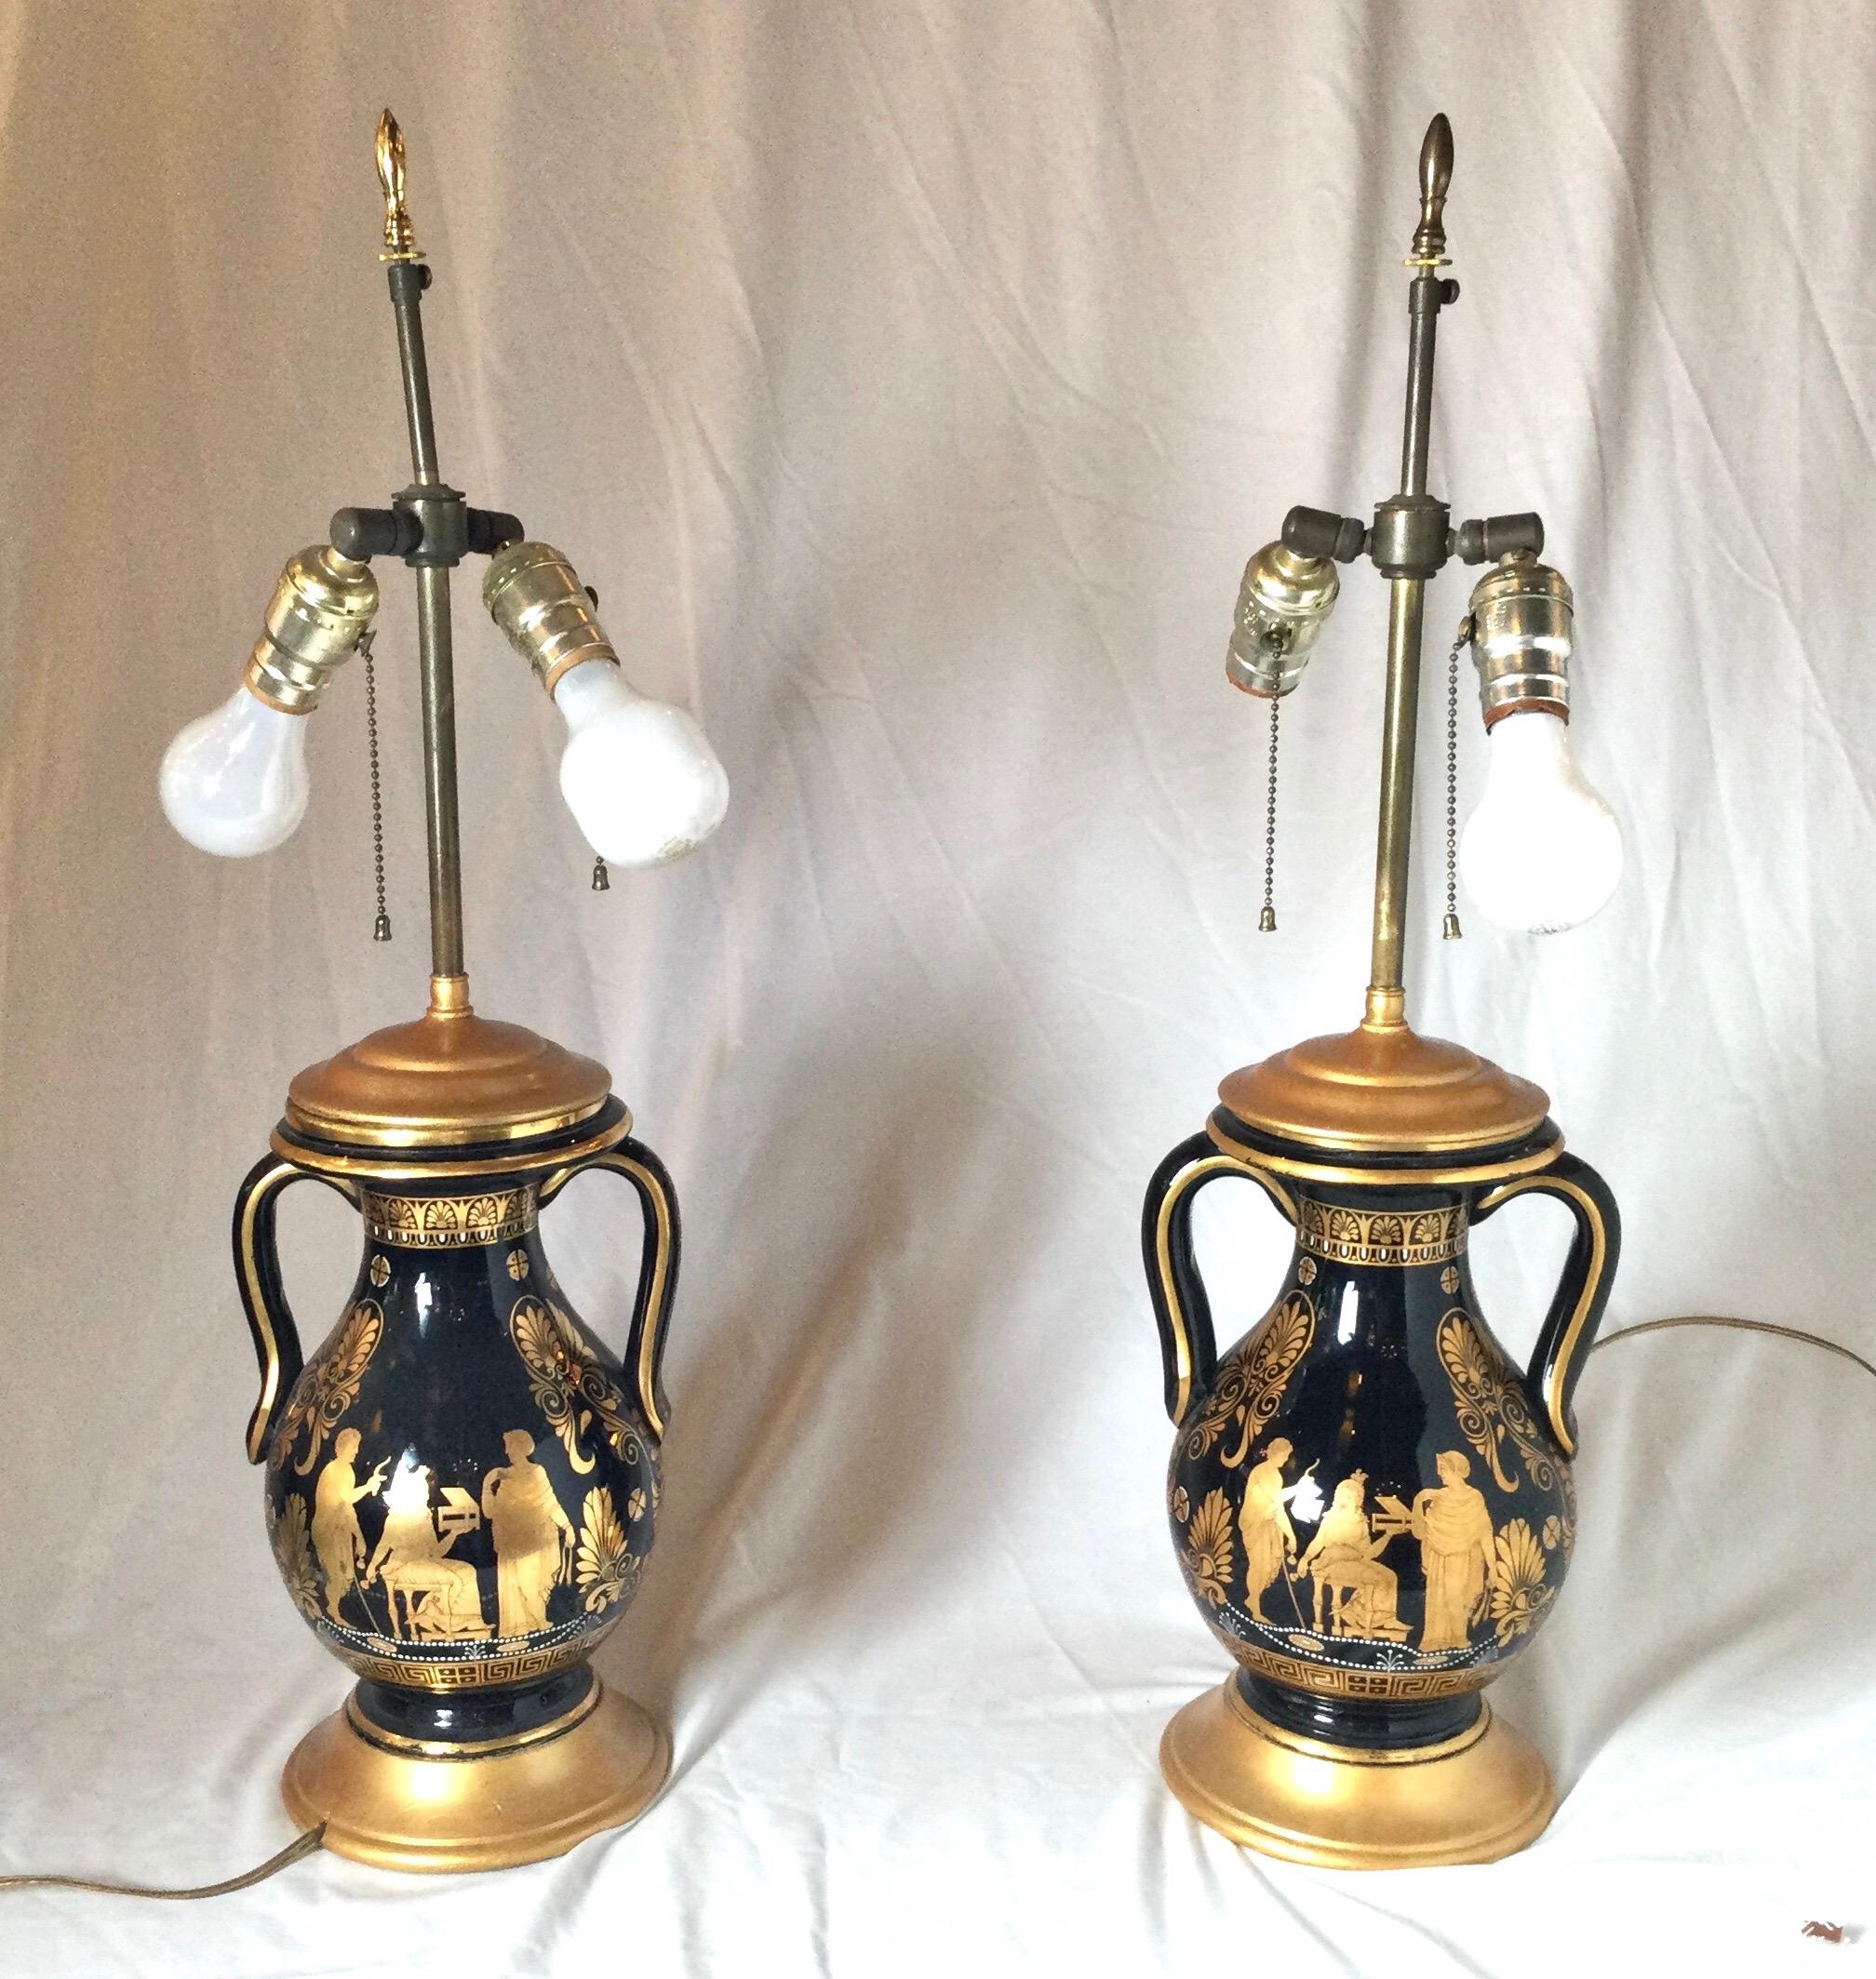 A pair of rare back and gold Greek Revival handled urn lamps with gilt decoration. The bodies with draped Greek figures and Greek key and hand applied white bead decoration. The double sockets with an adjustable shade height. The shades are for